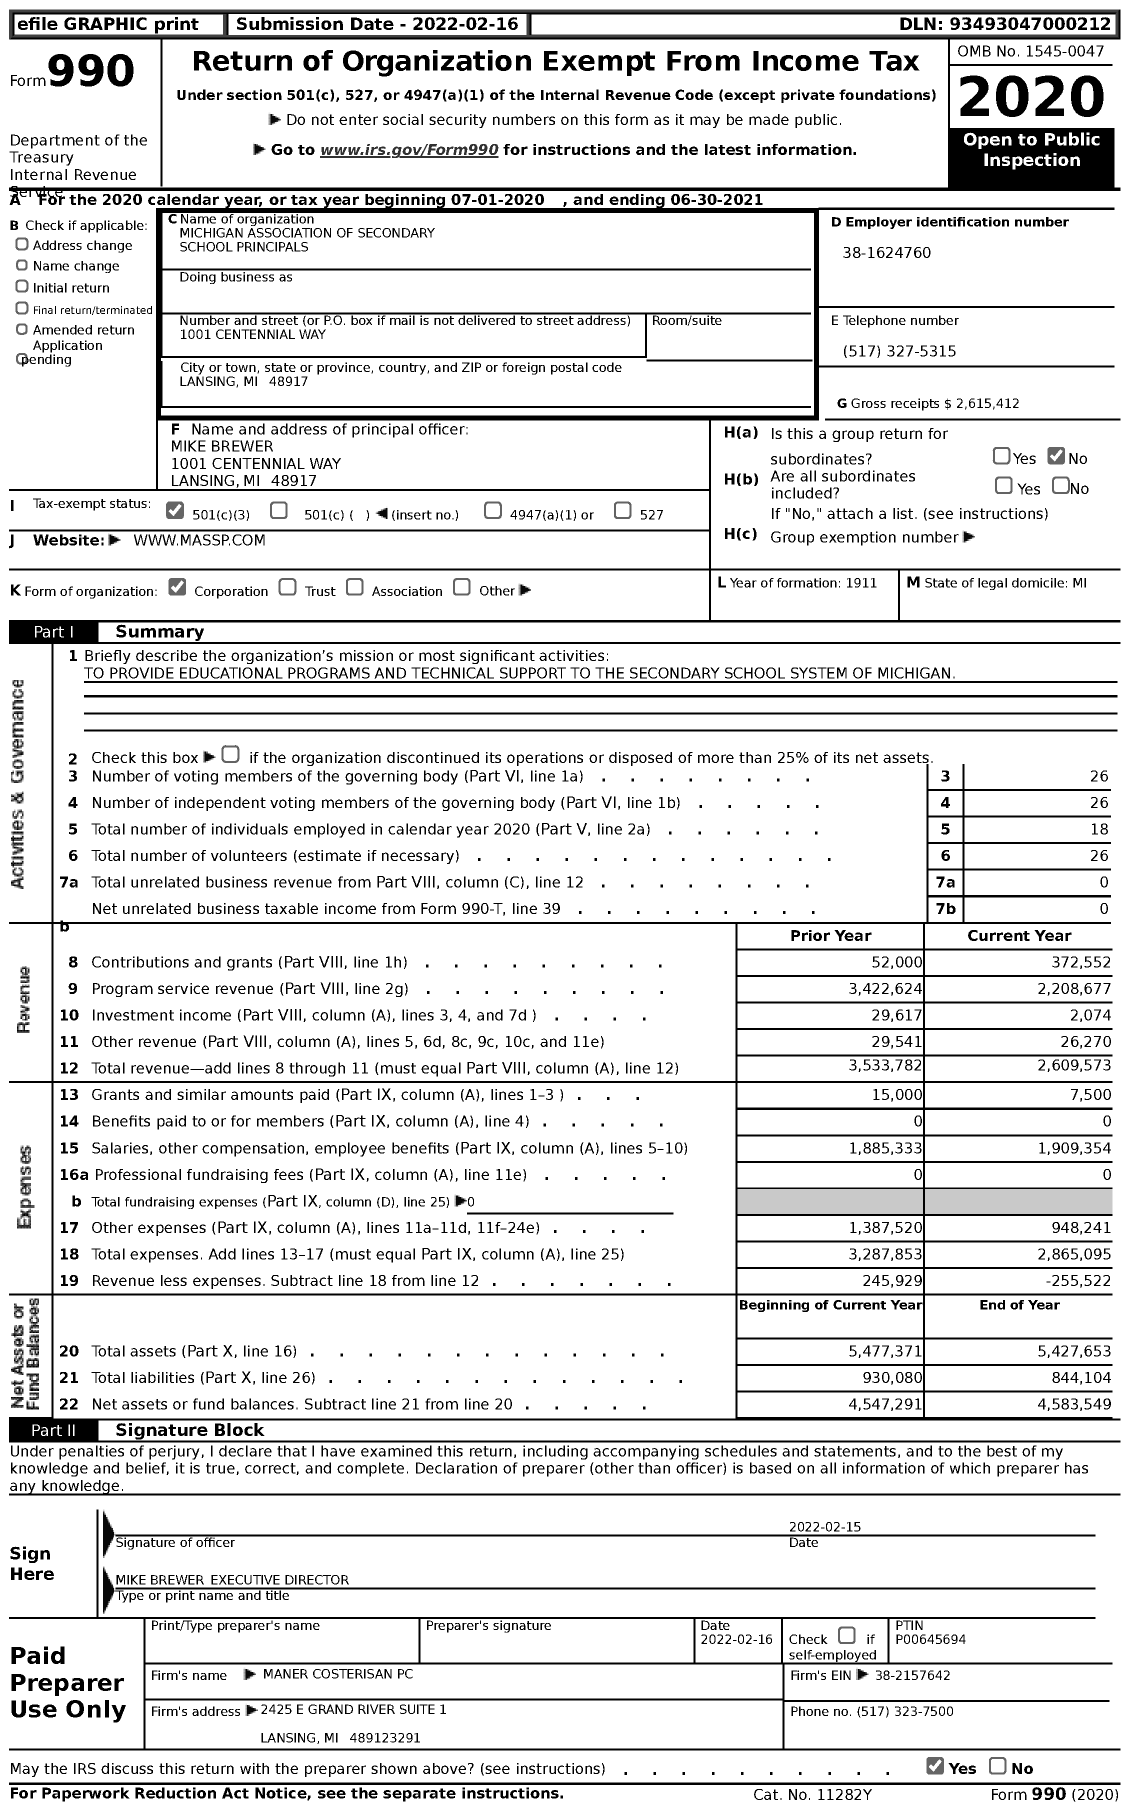 Image of first page of 2020 Form 990 for Michigan Association of Secondary School Principals (MASSP)